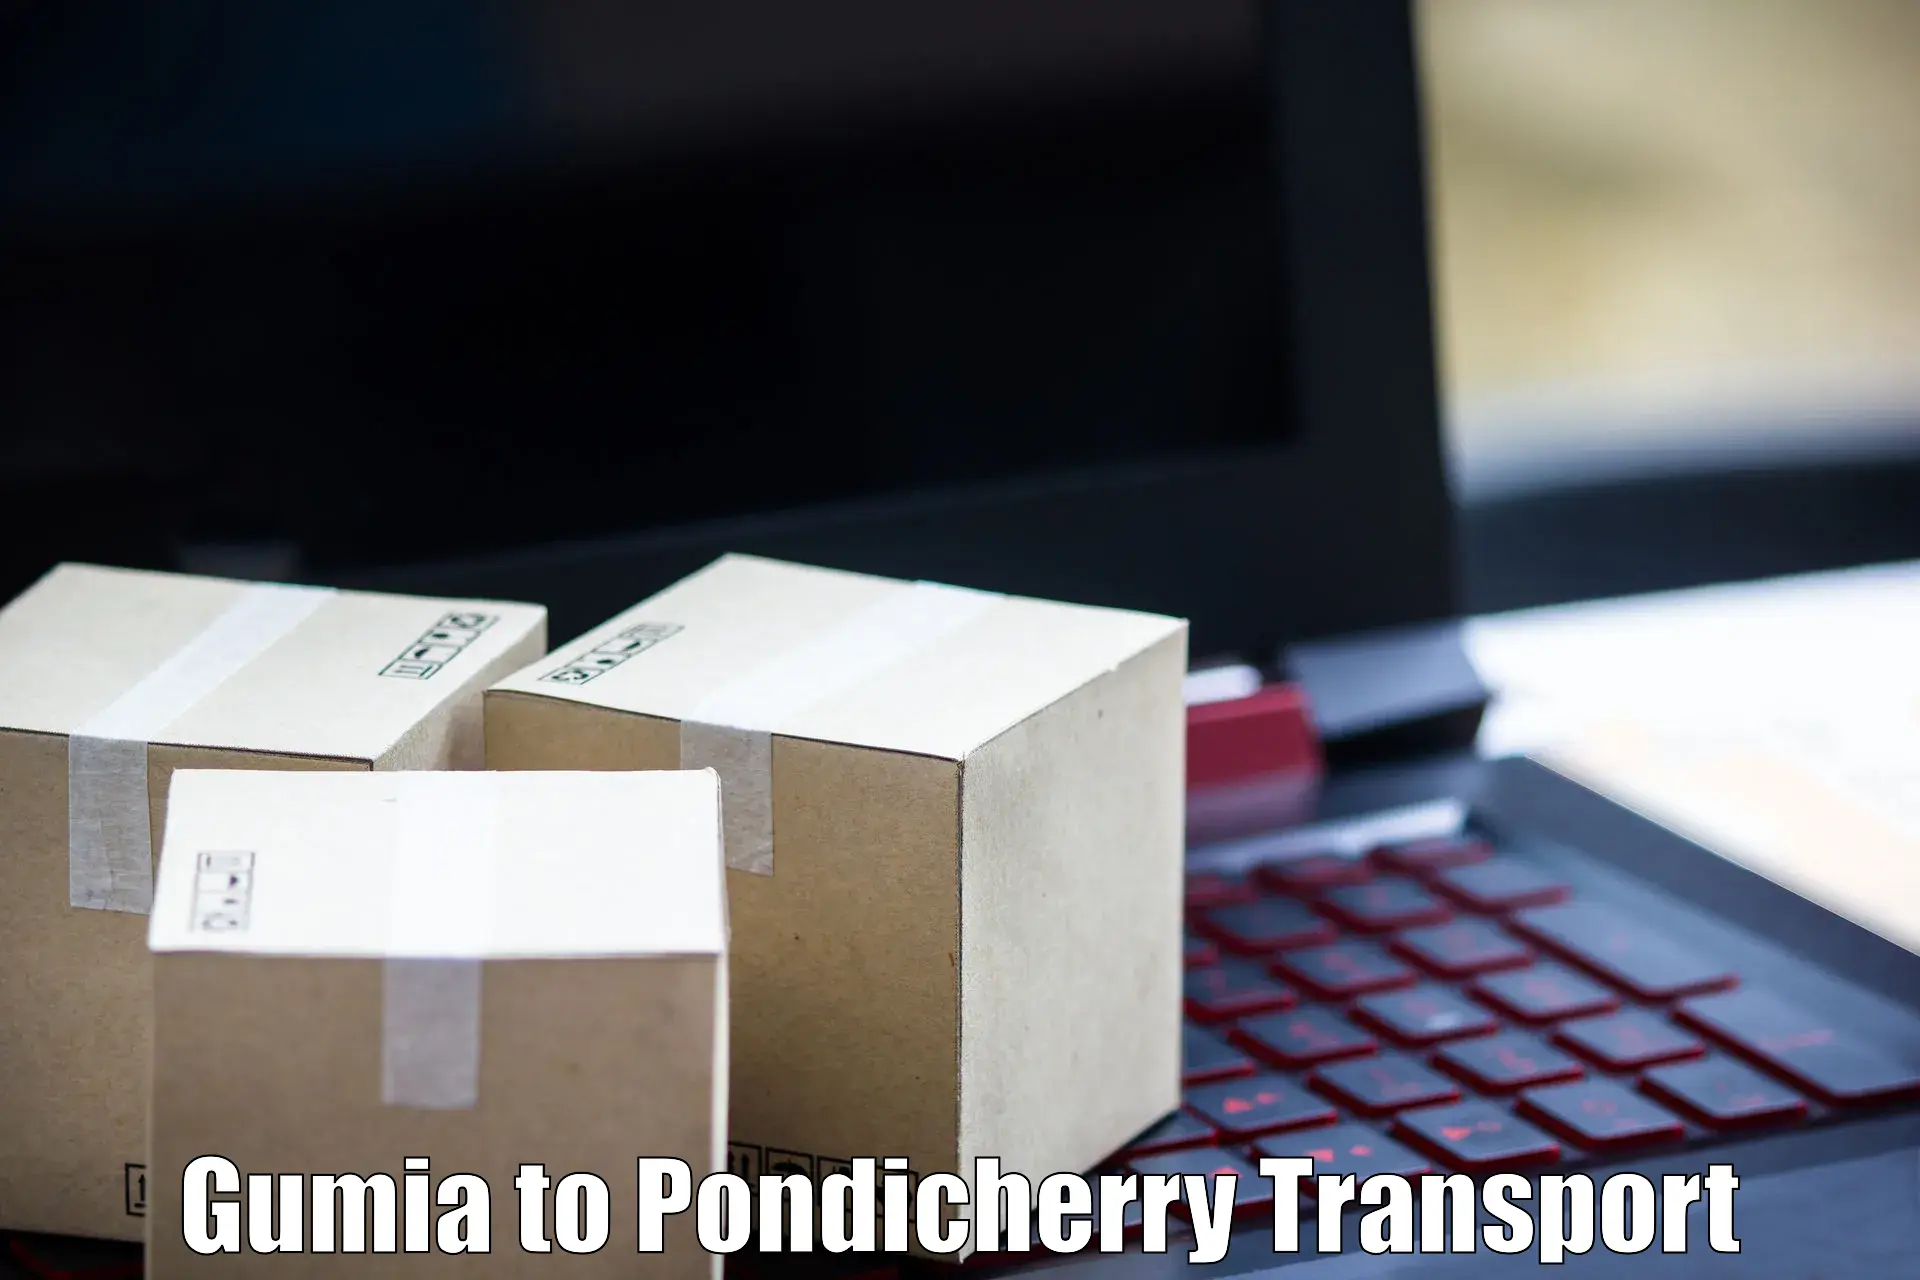 Transport shared services Gumia to Pondicherry